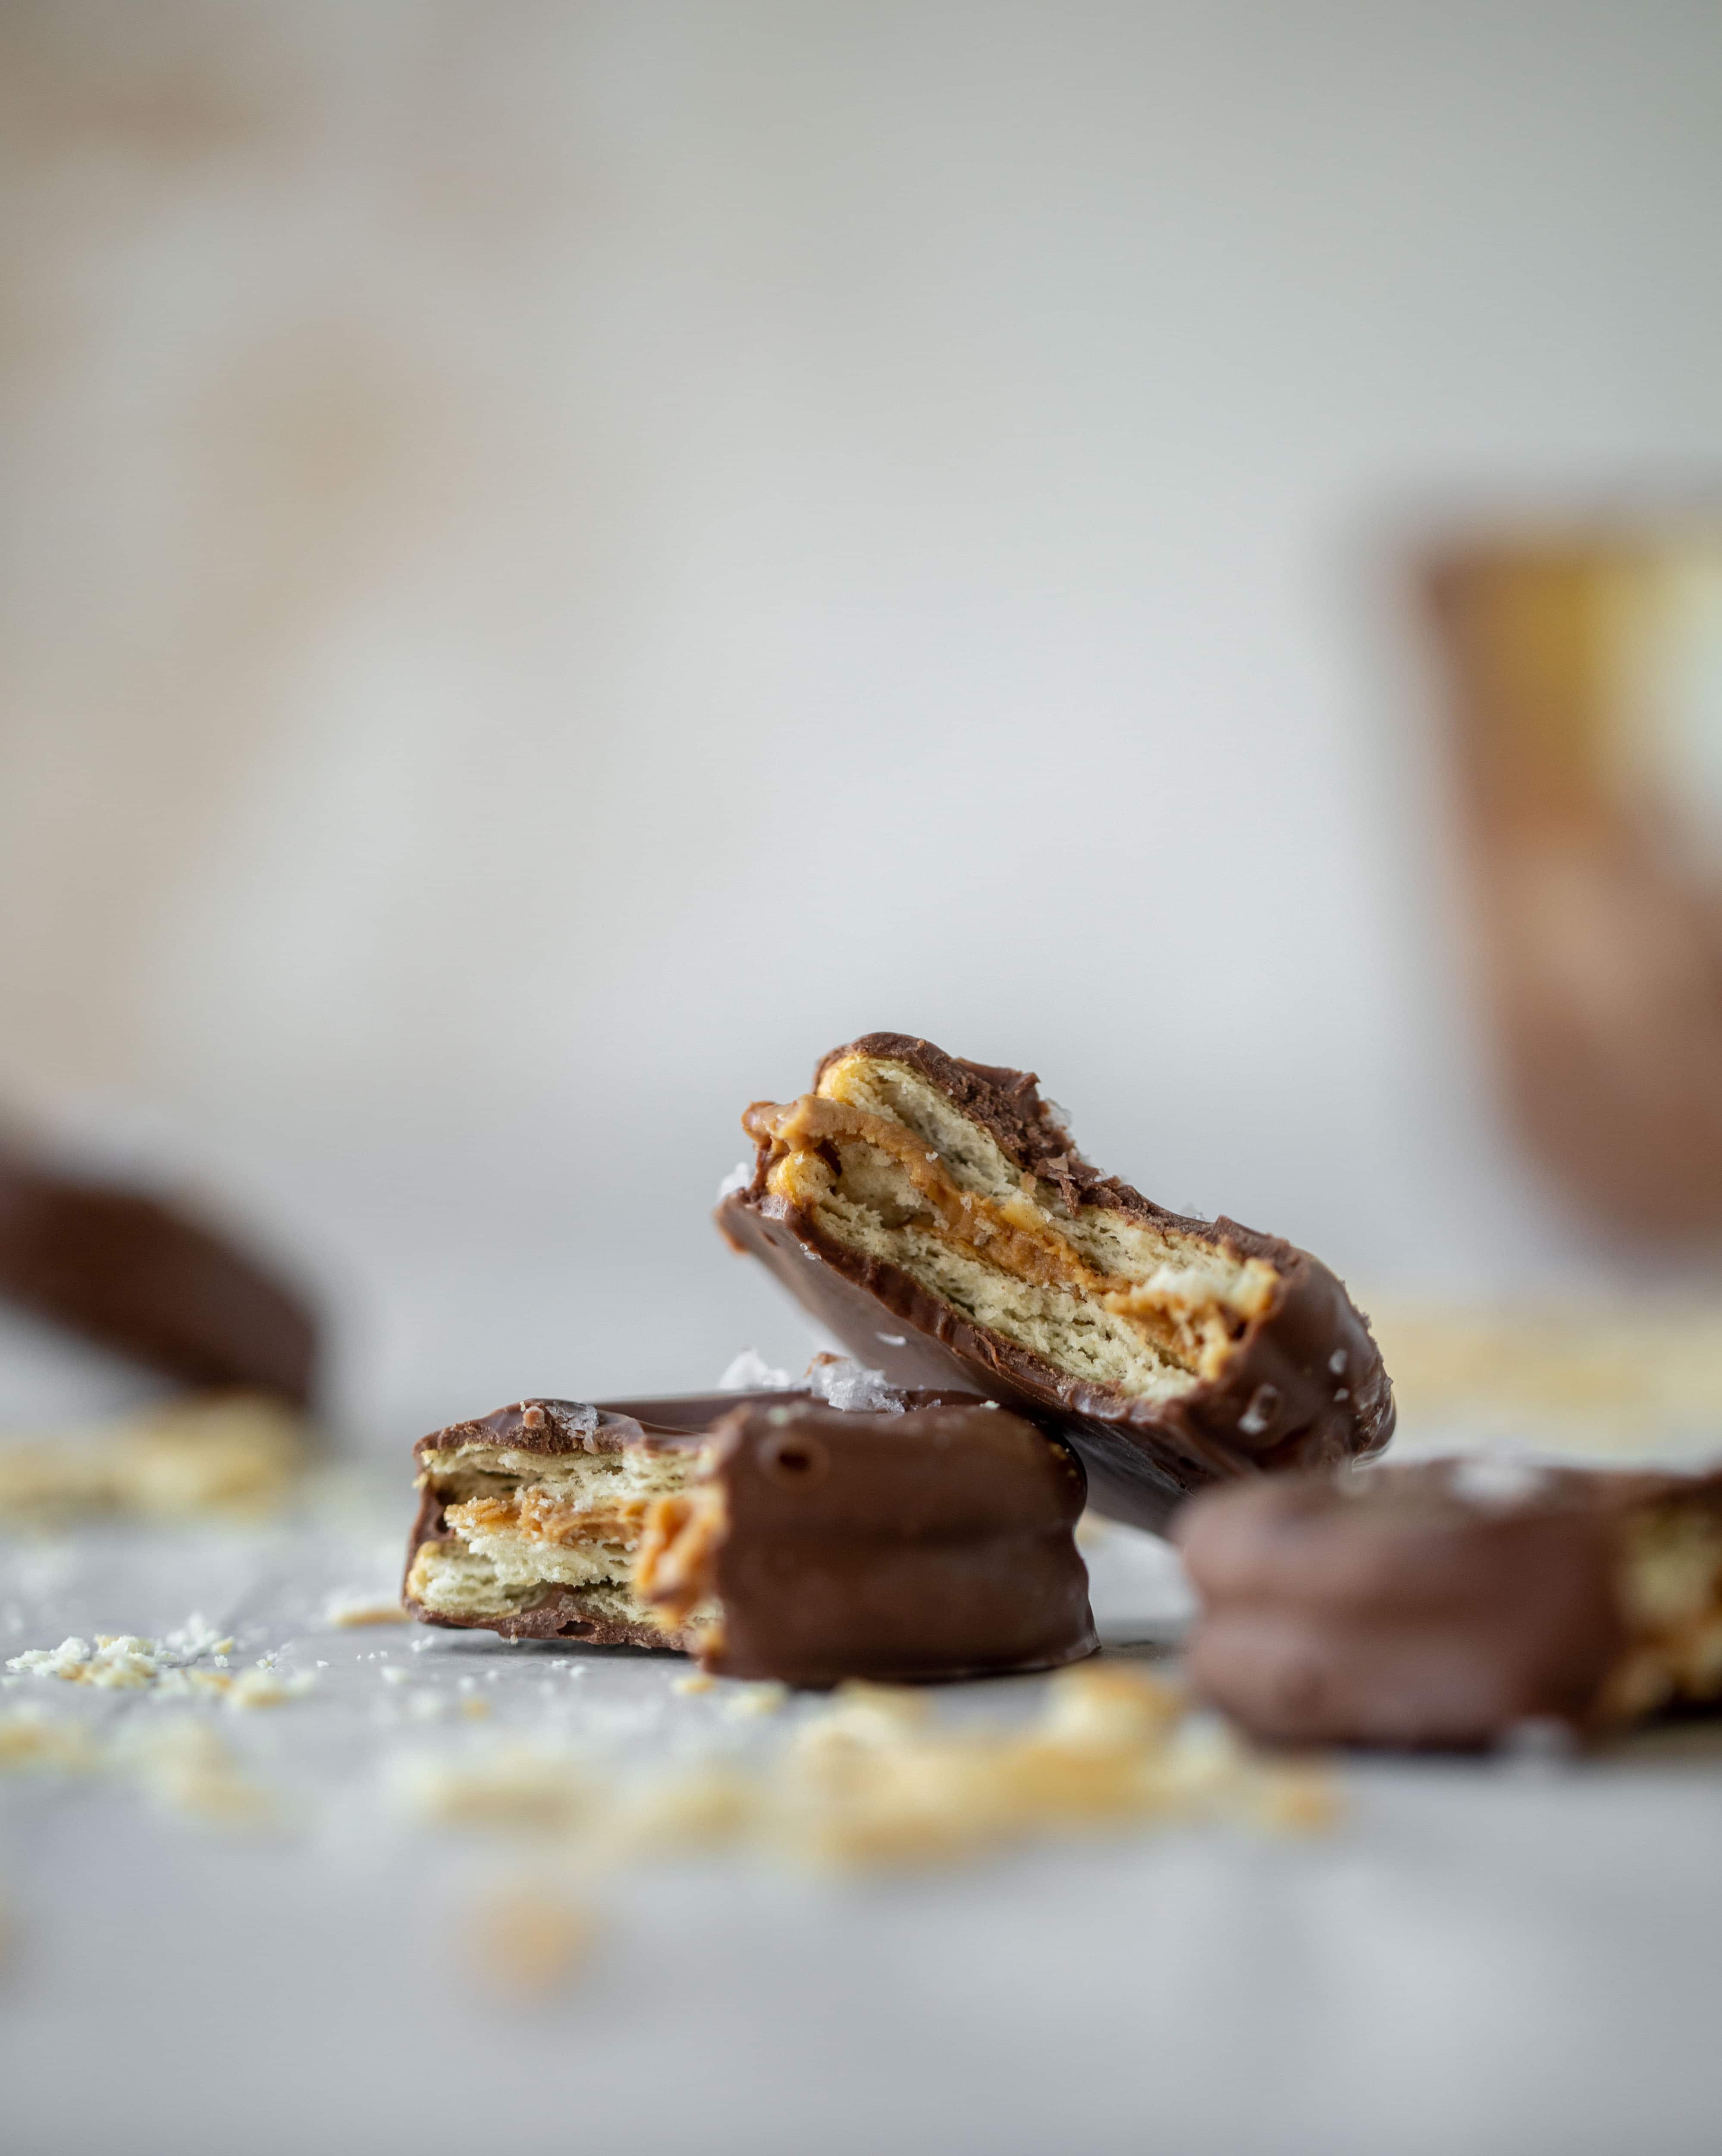 These ritz peanut butter cups are everything! Creamy peanut butter, flakey, buttery crackers, melted chocolate and flaked salt. They are unreal.